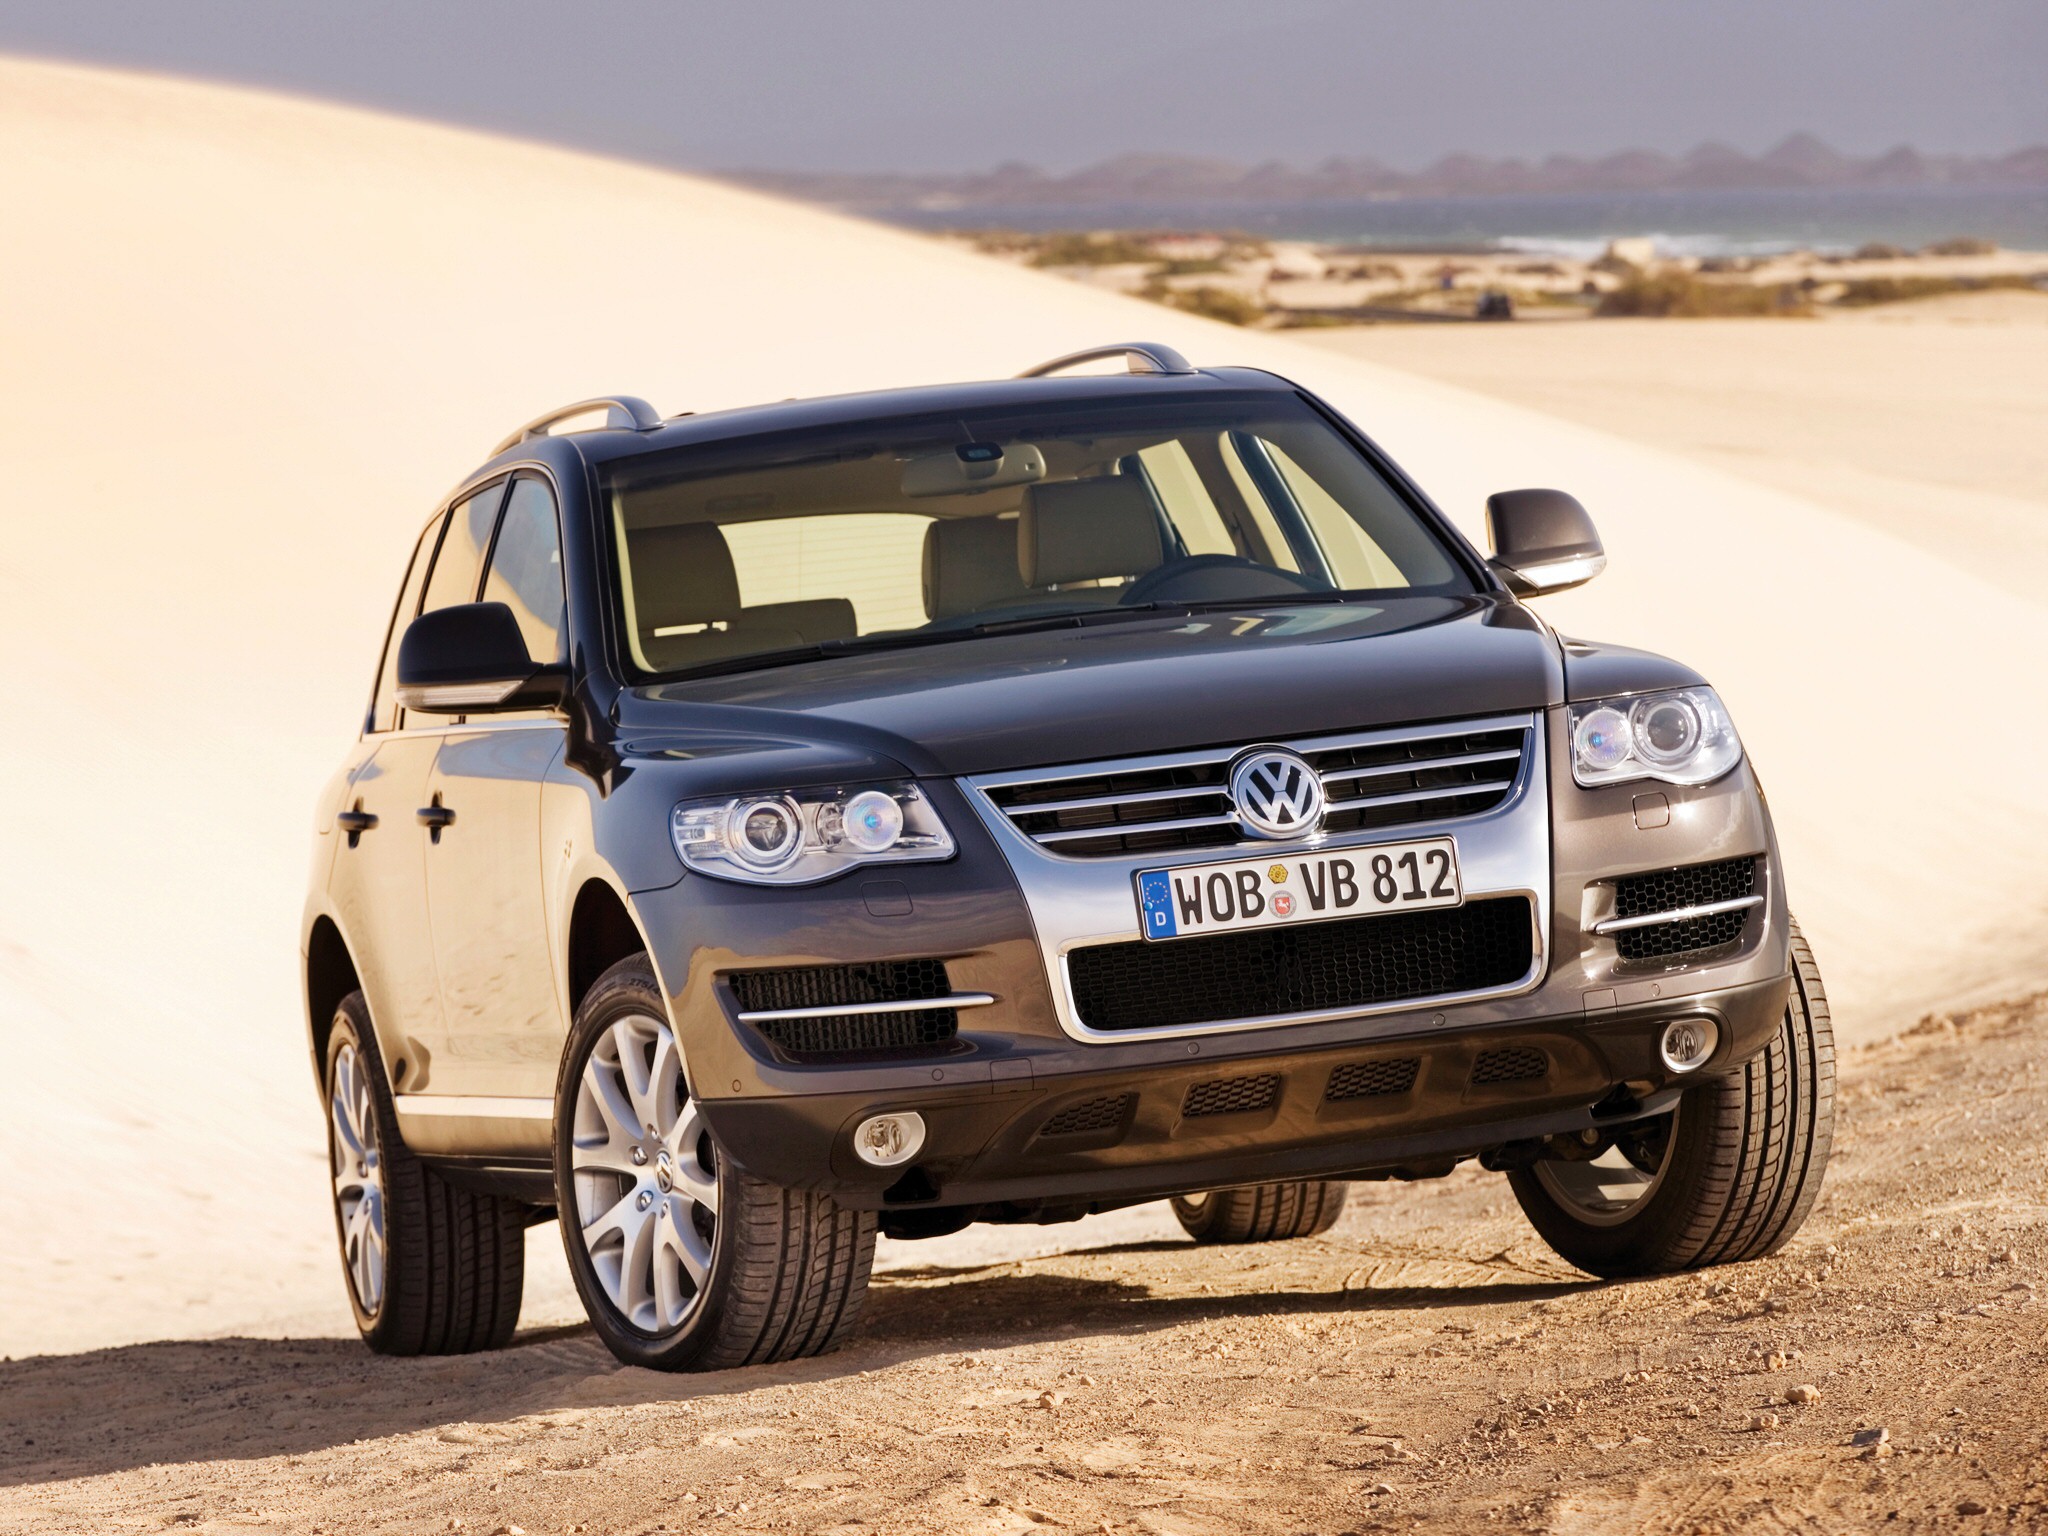 Car in pictures car photo gallery » Volkswagen Touareg